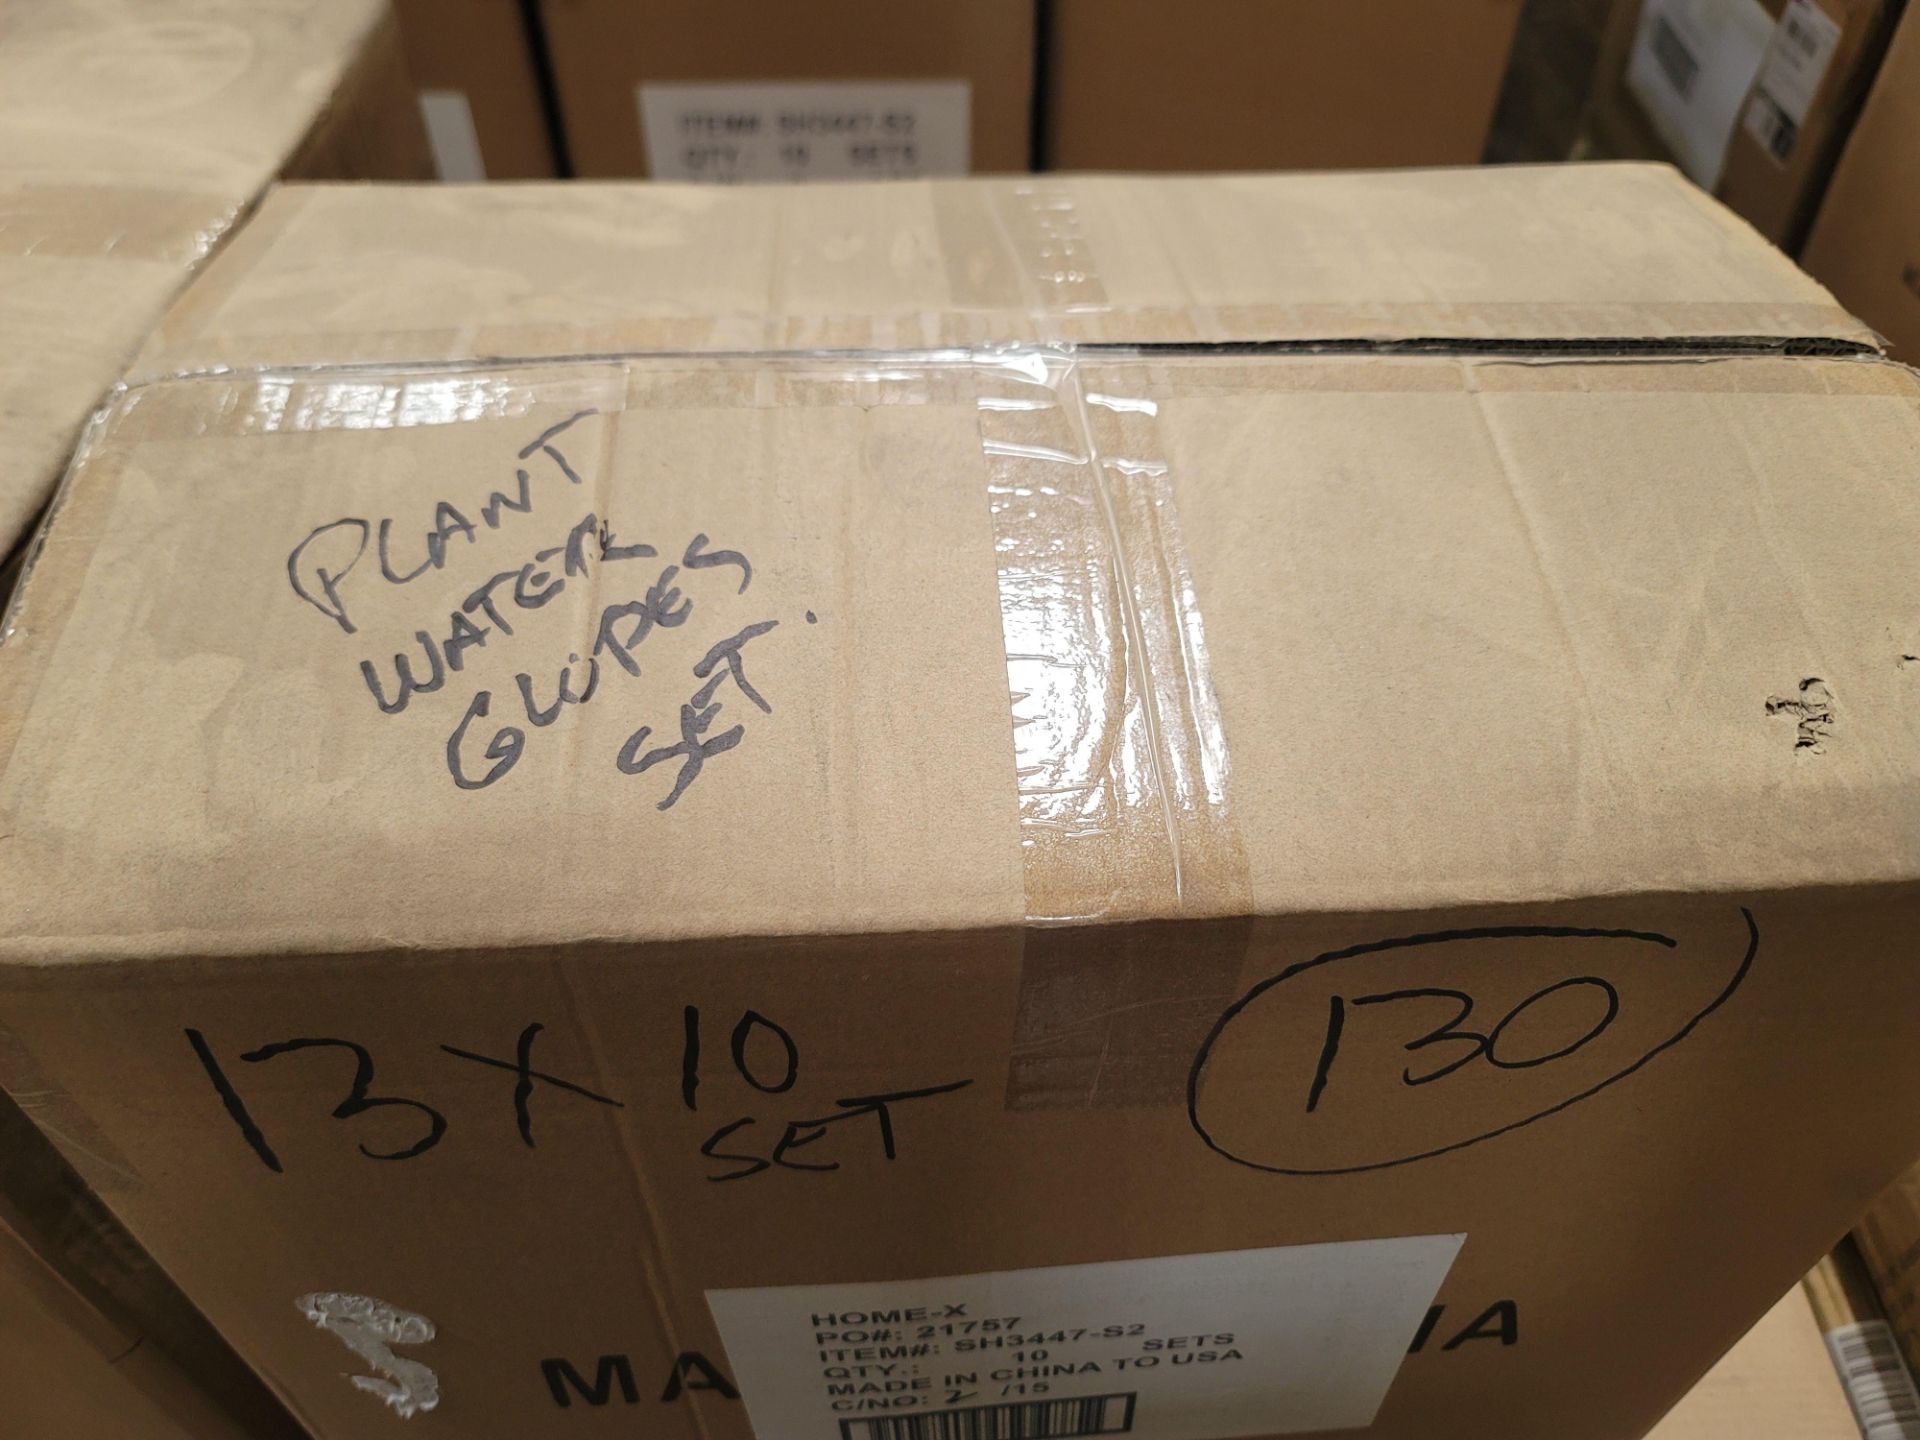 LOT - PALLET OF (130) 2-PC GLASS PLANT WATERING GLOBES, (13 CASES/10 PER CASE) - Image 2 of 4